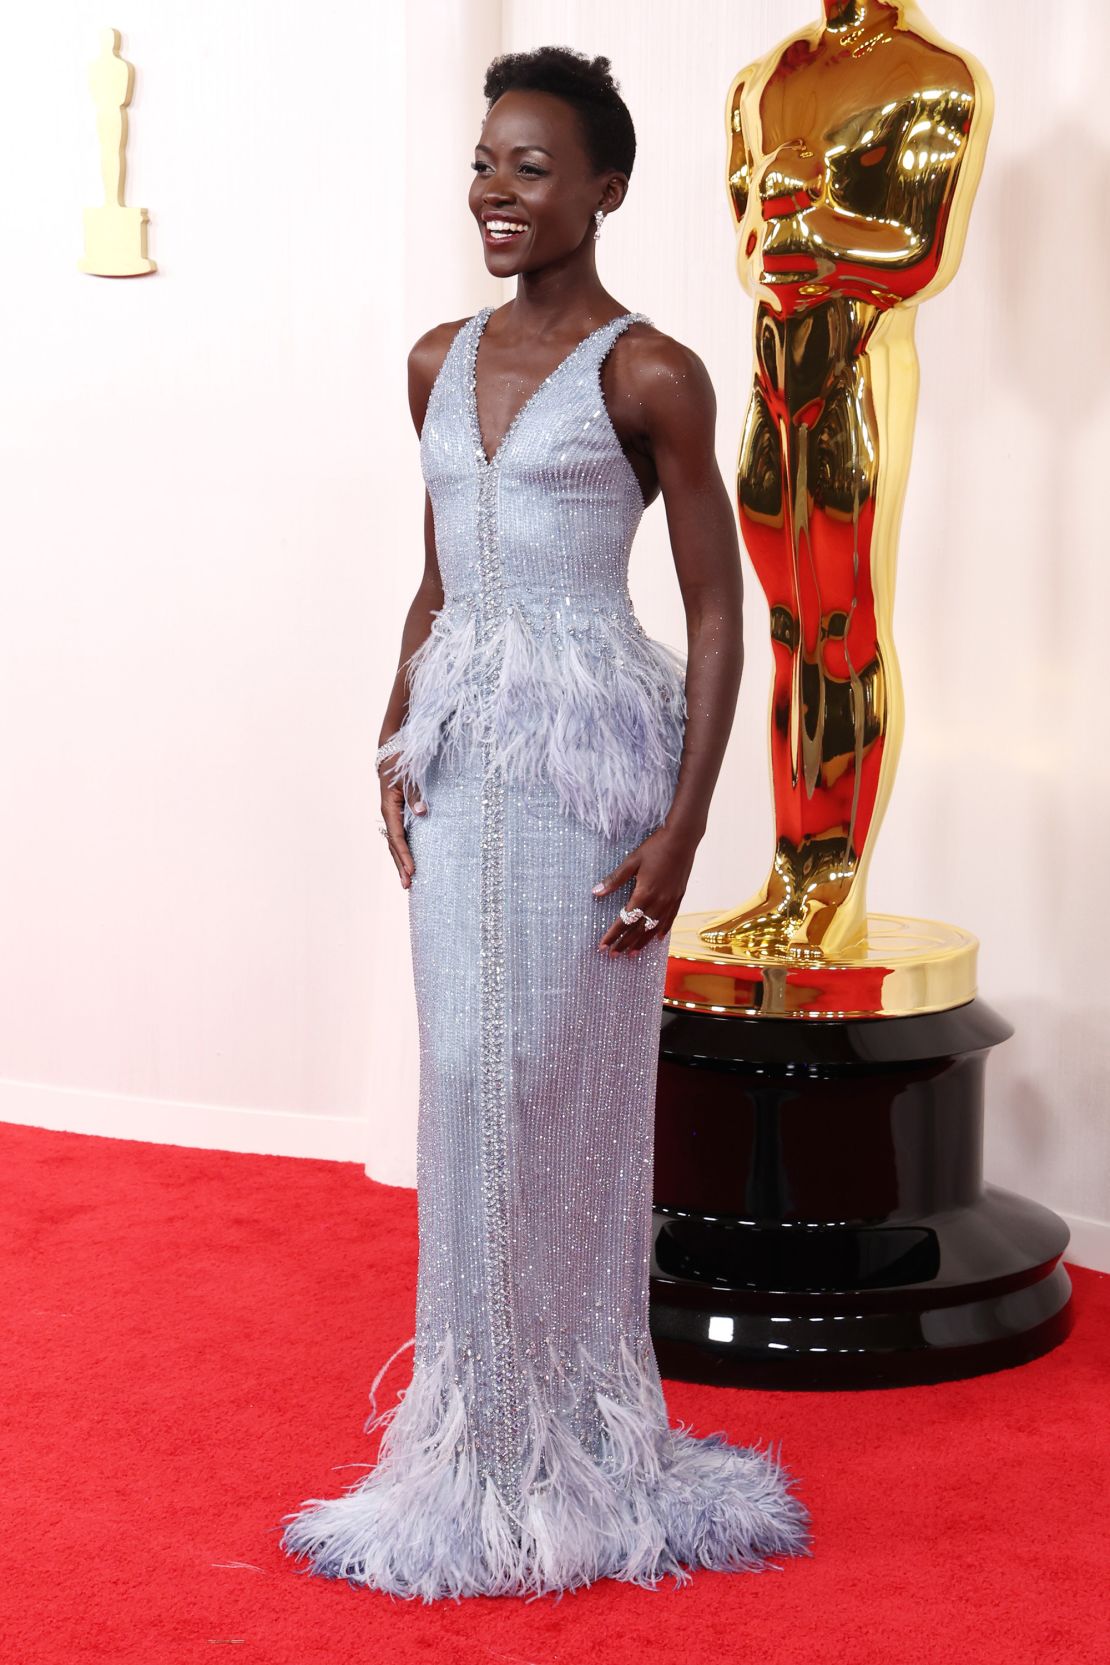 Lupita Nyong'o took to the red carpet in a dazzling Armani Privé gown featuring feather-like embellishments at the waist and hem. The actor accessorized with white gold De Beers jewelry.